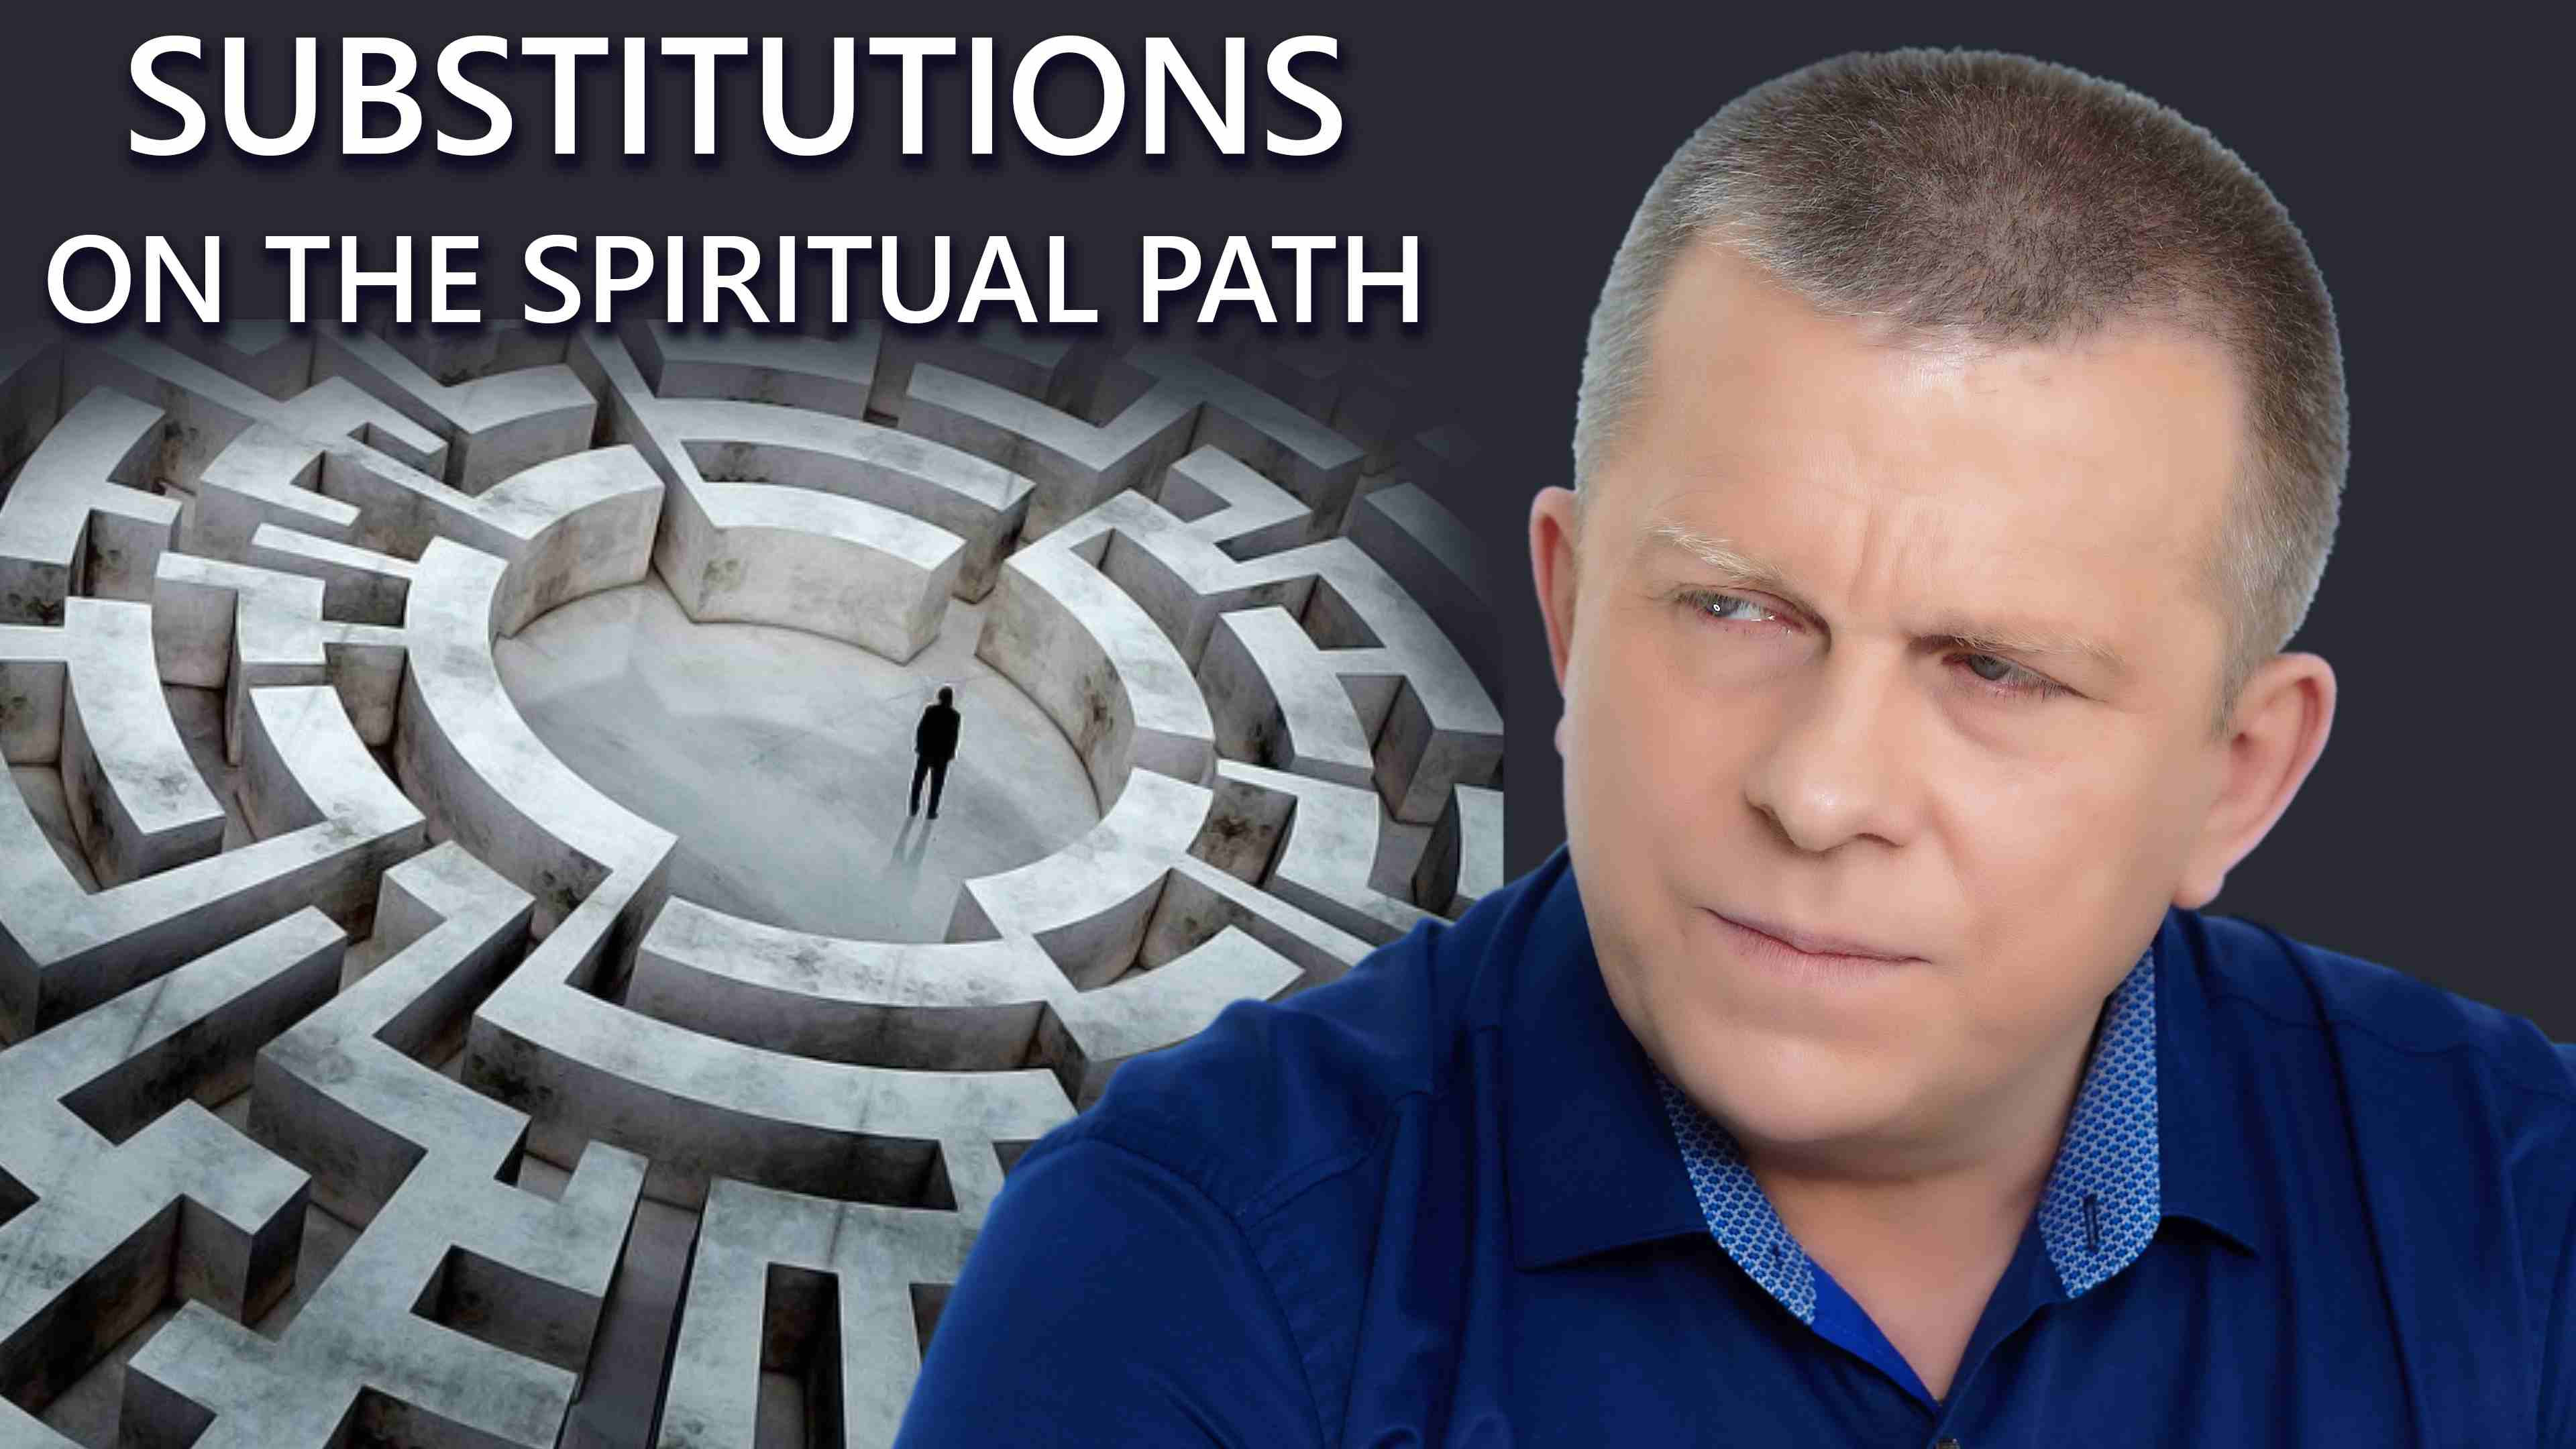 Substitutions on the Spiritual Path